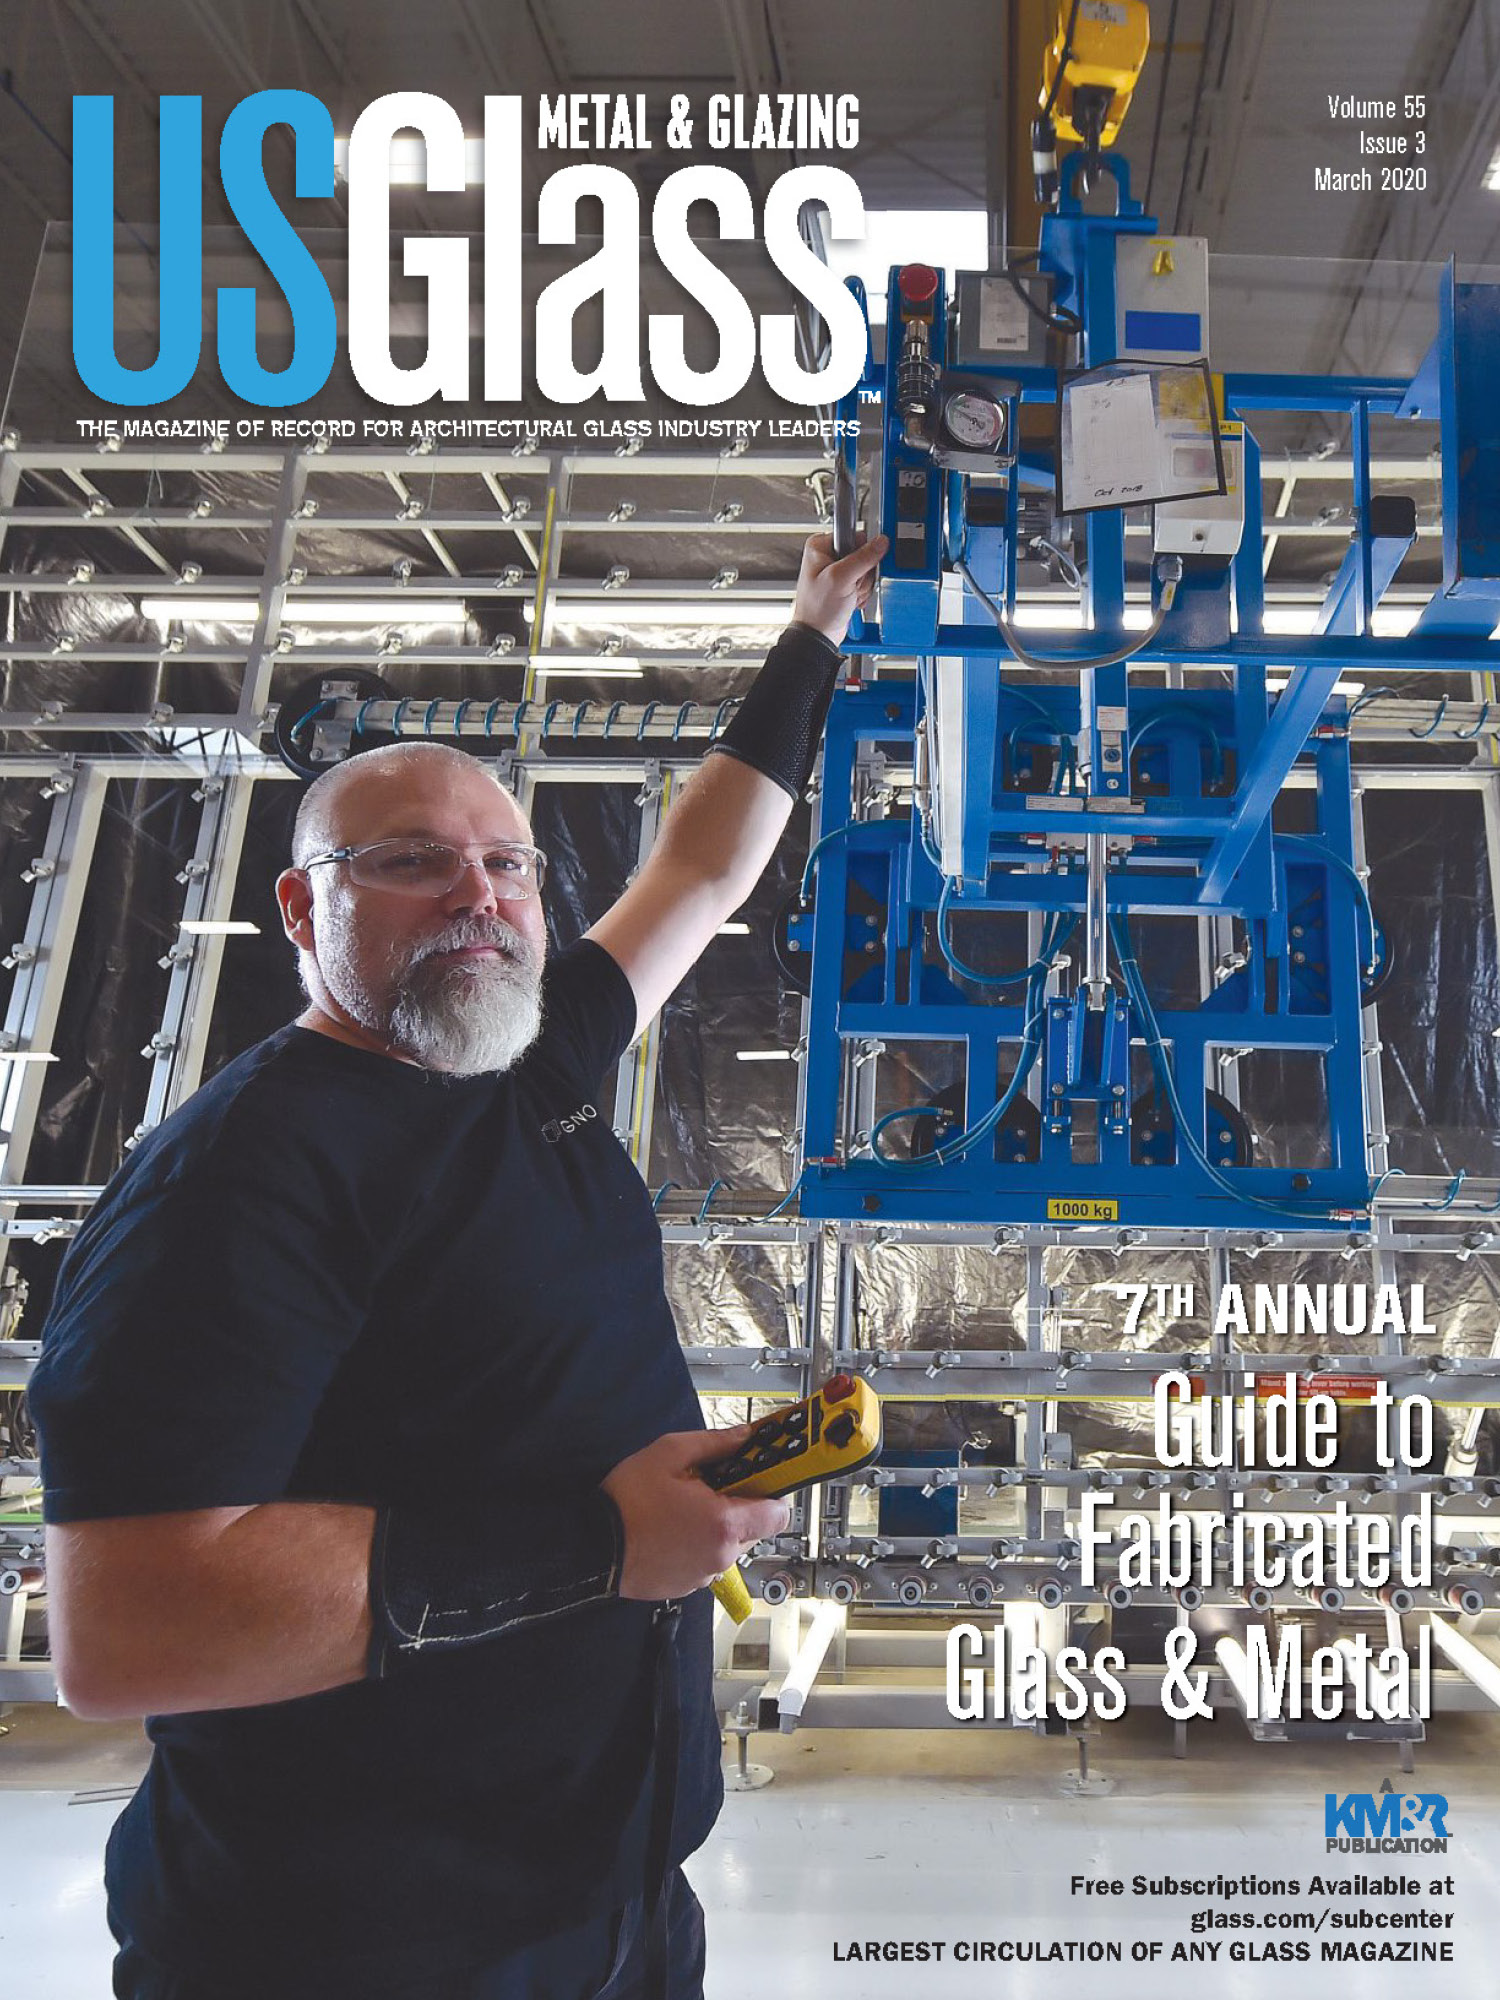 Lee Wilson, Operator at AGNORA stands in front of lift device on the cover of US Glass Magazine